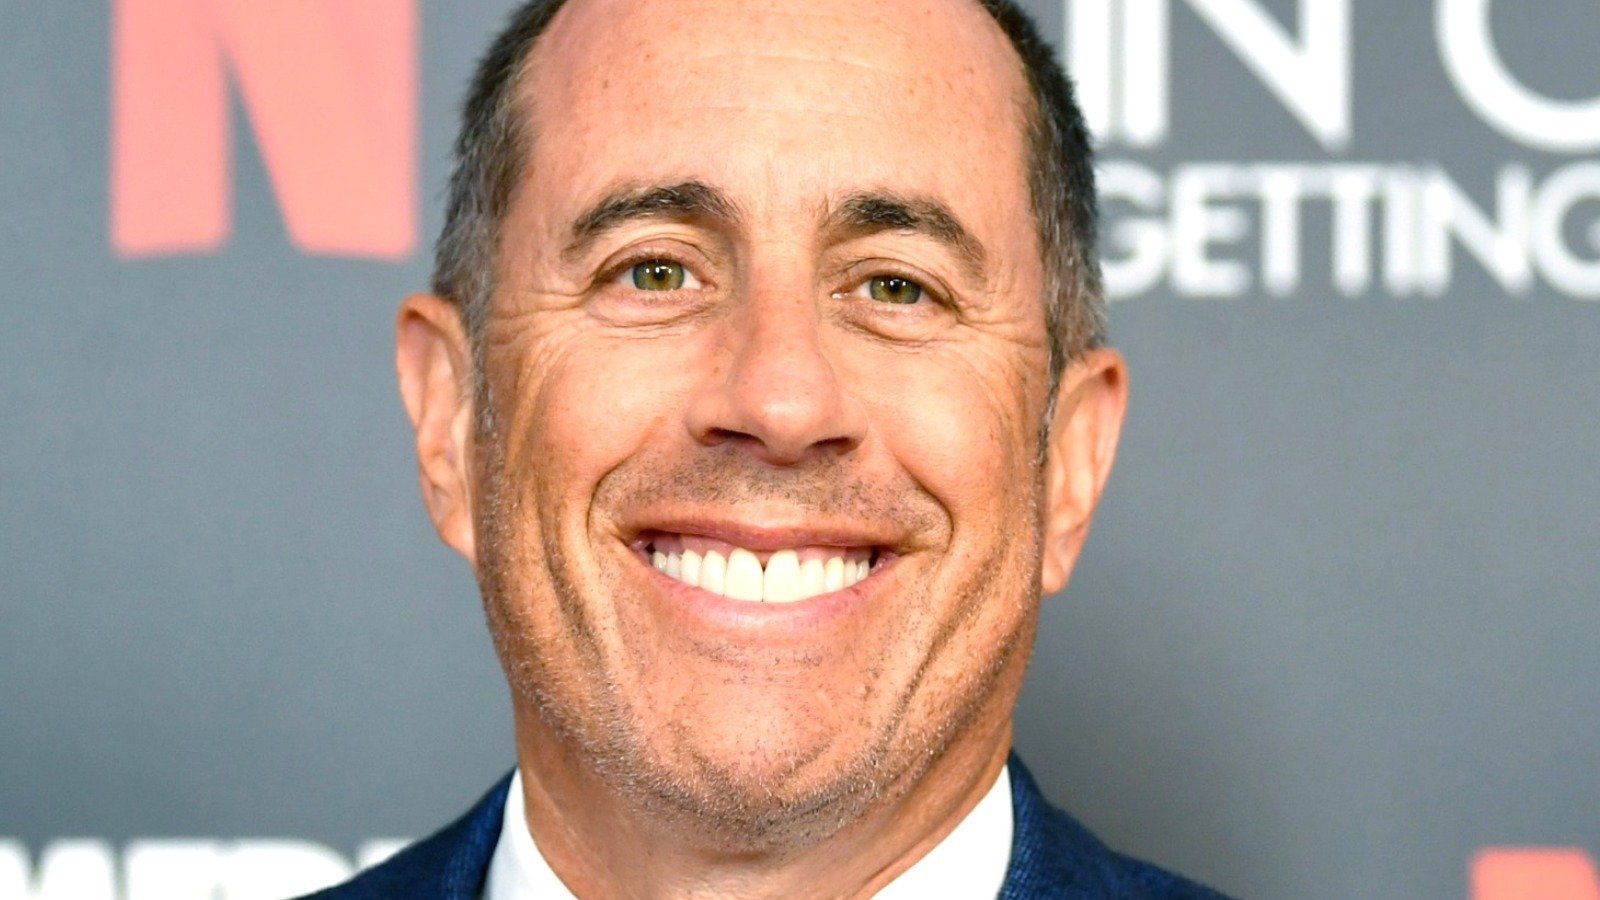 The Seinfeld Episode That Made Jerry Seinfeld 'Very Uncomfortable'